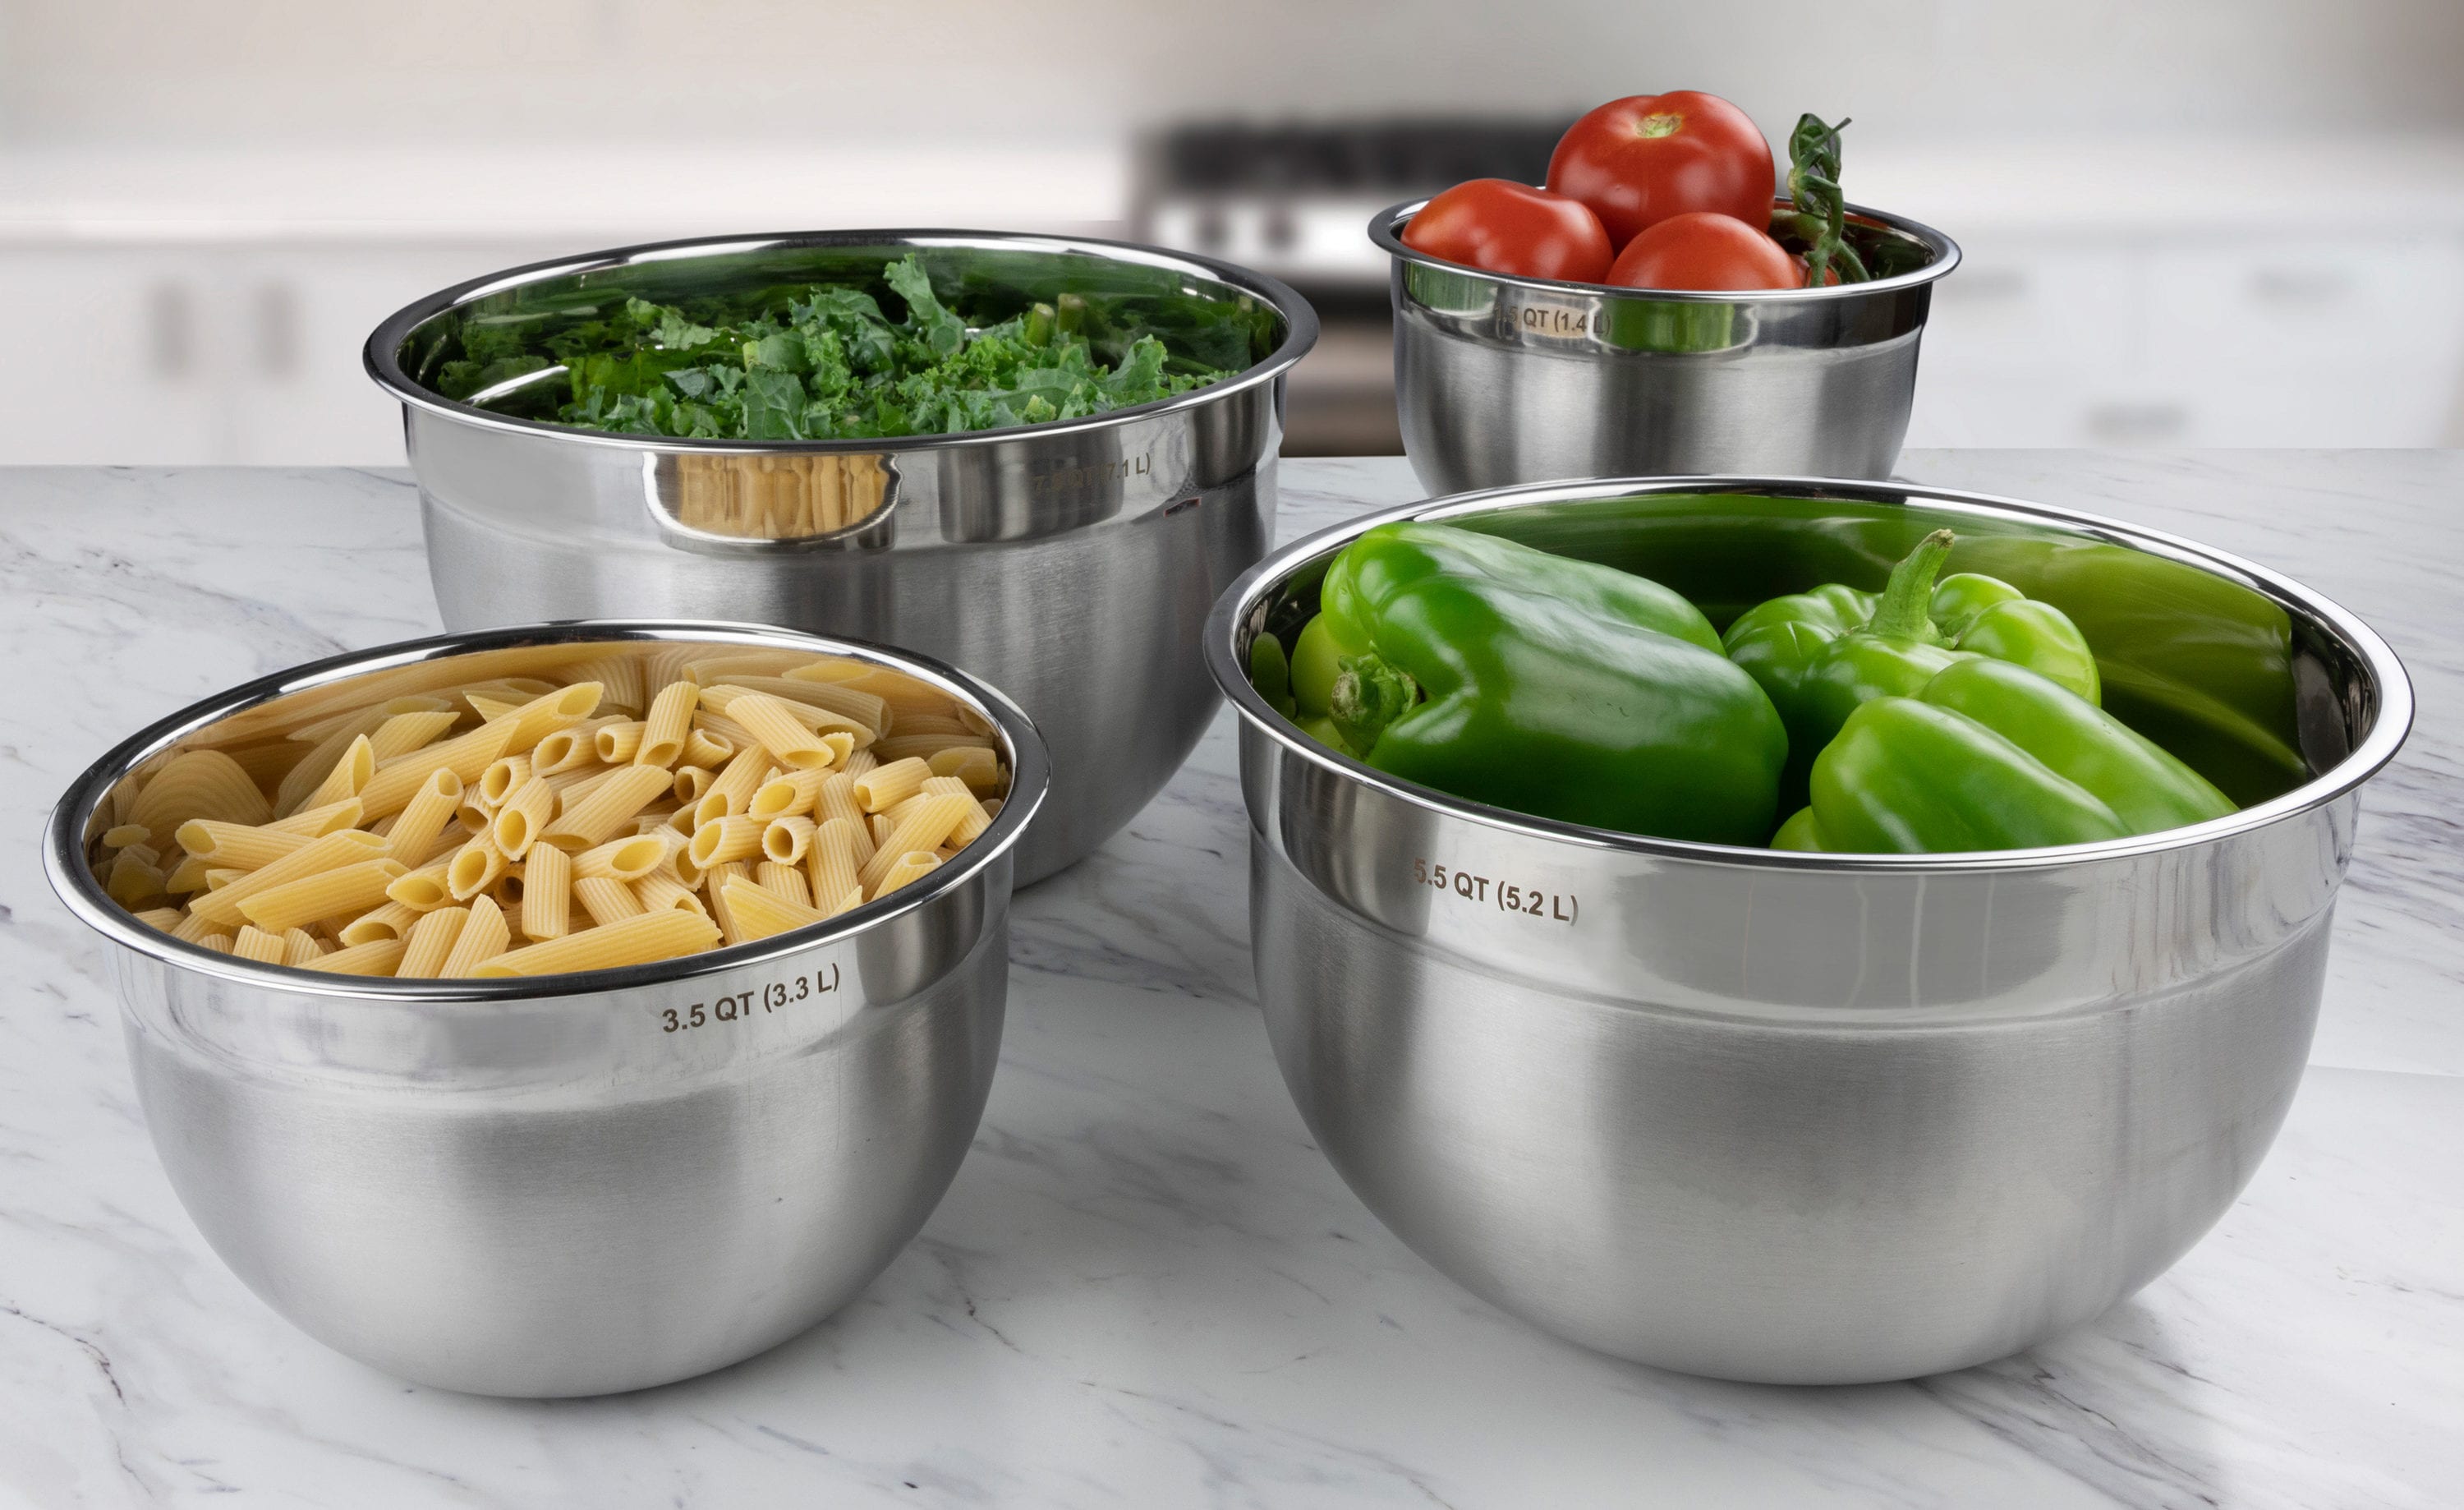 Tovolo Stainless Steel, Set of 3 Mixing Tight-Seal Dishwasher-Safe Metal  Bowls with BPA-Free Lids for Food Storage, Stainless Steel